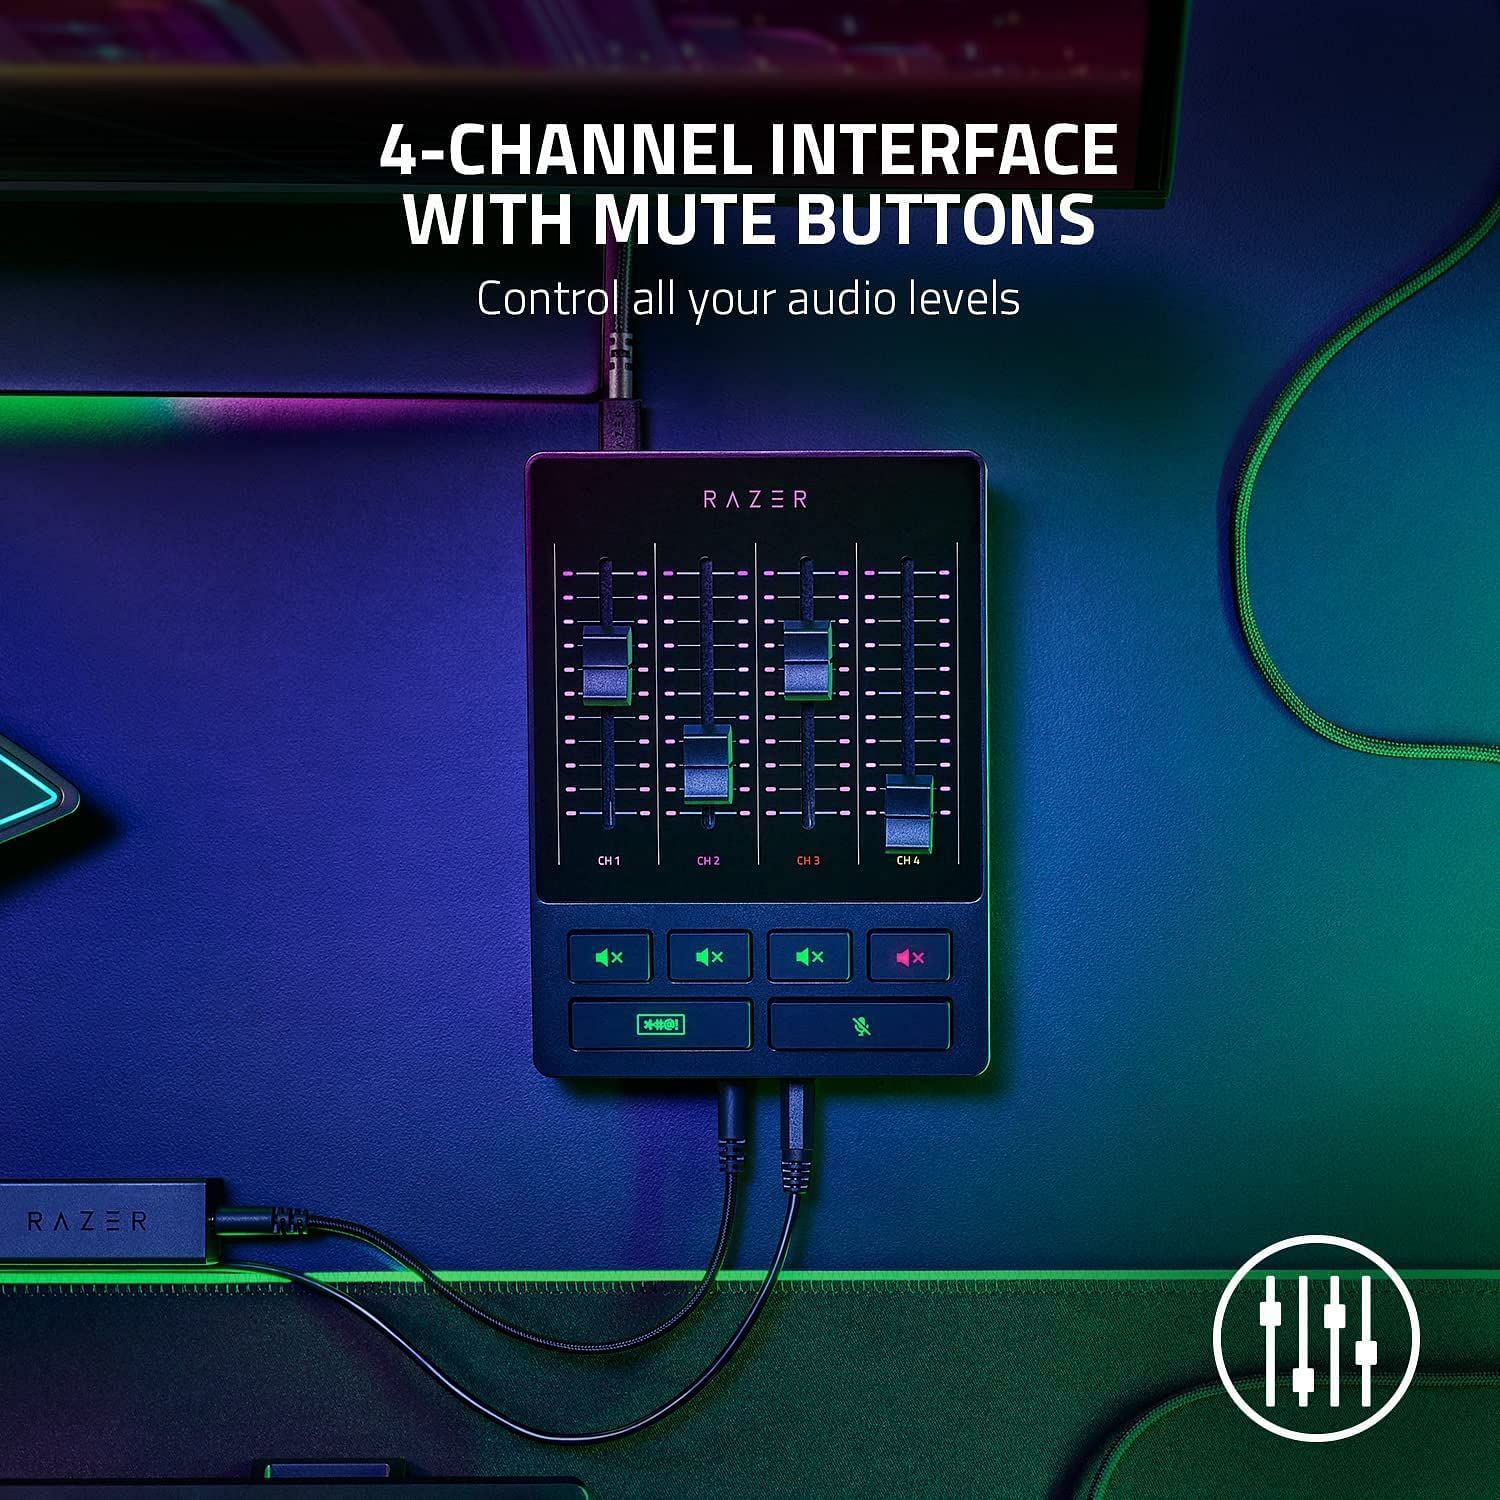 Control every sound input and output using this device (Image via Razer)